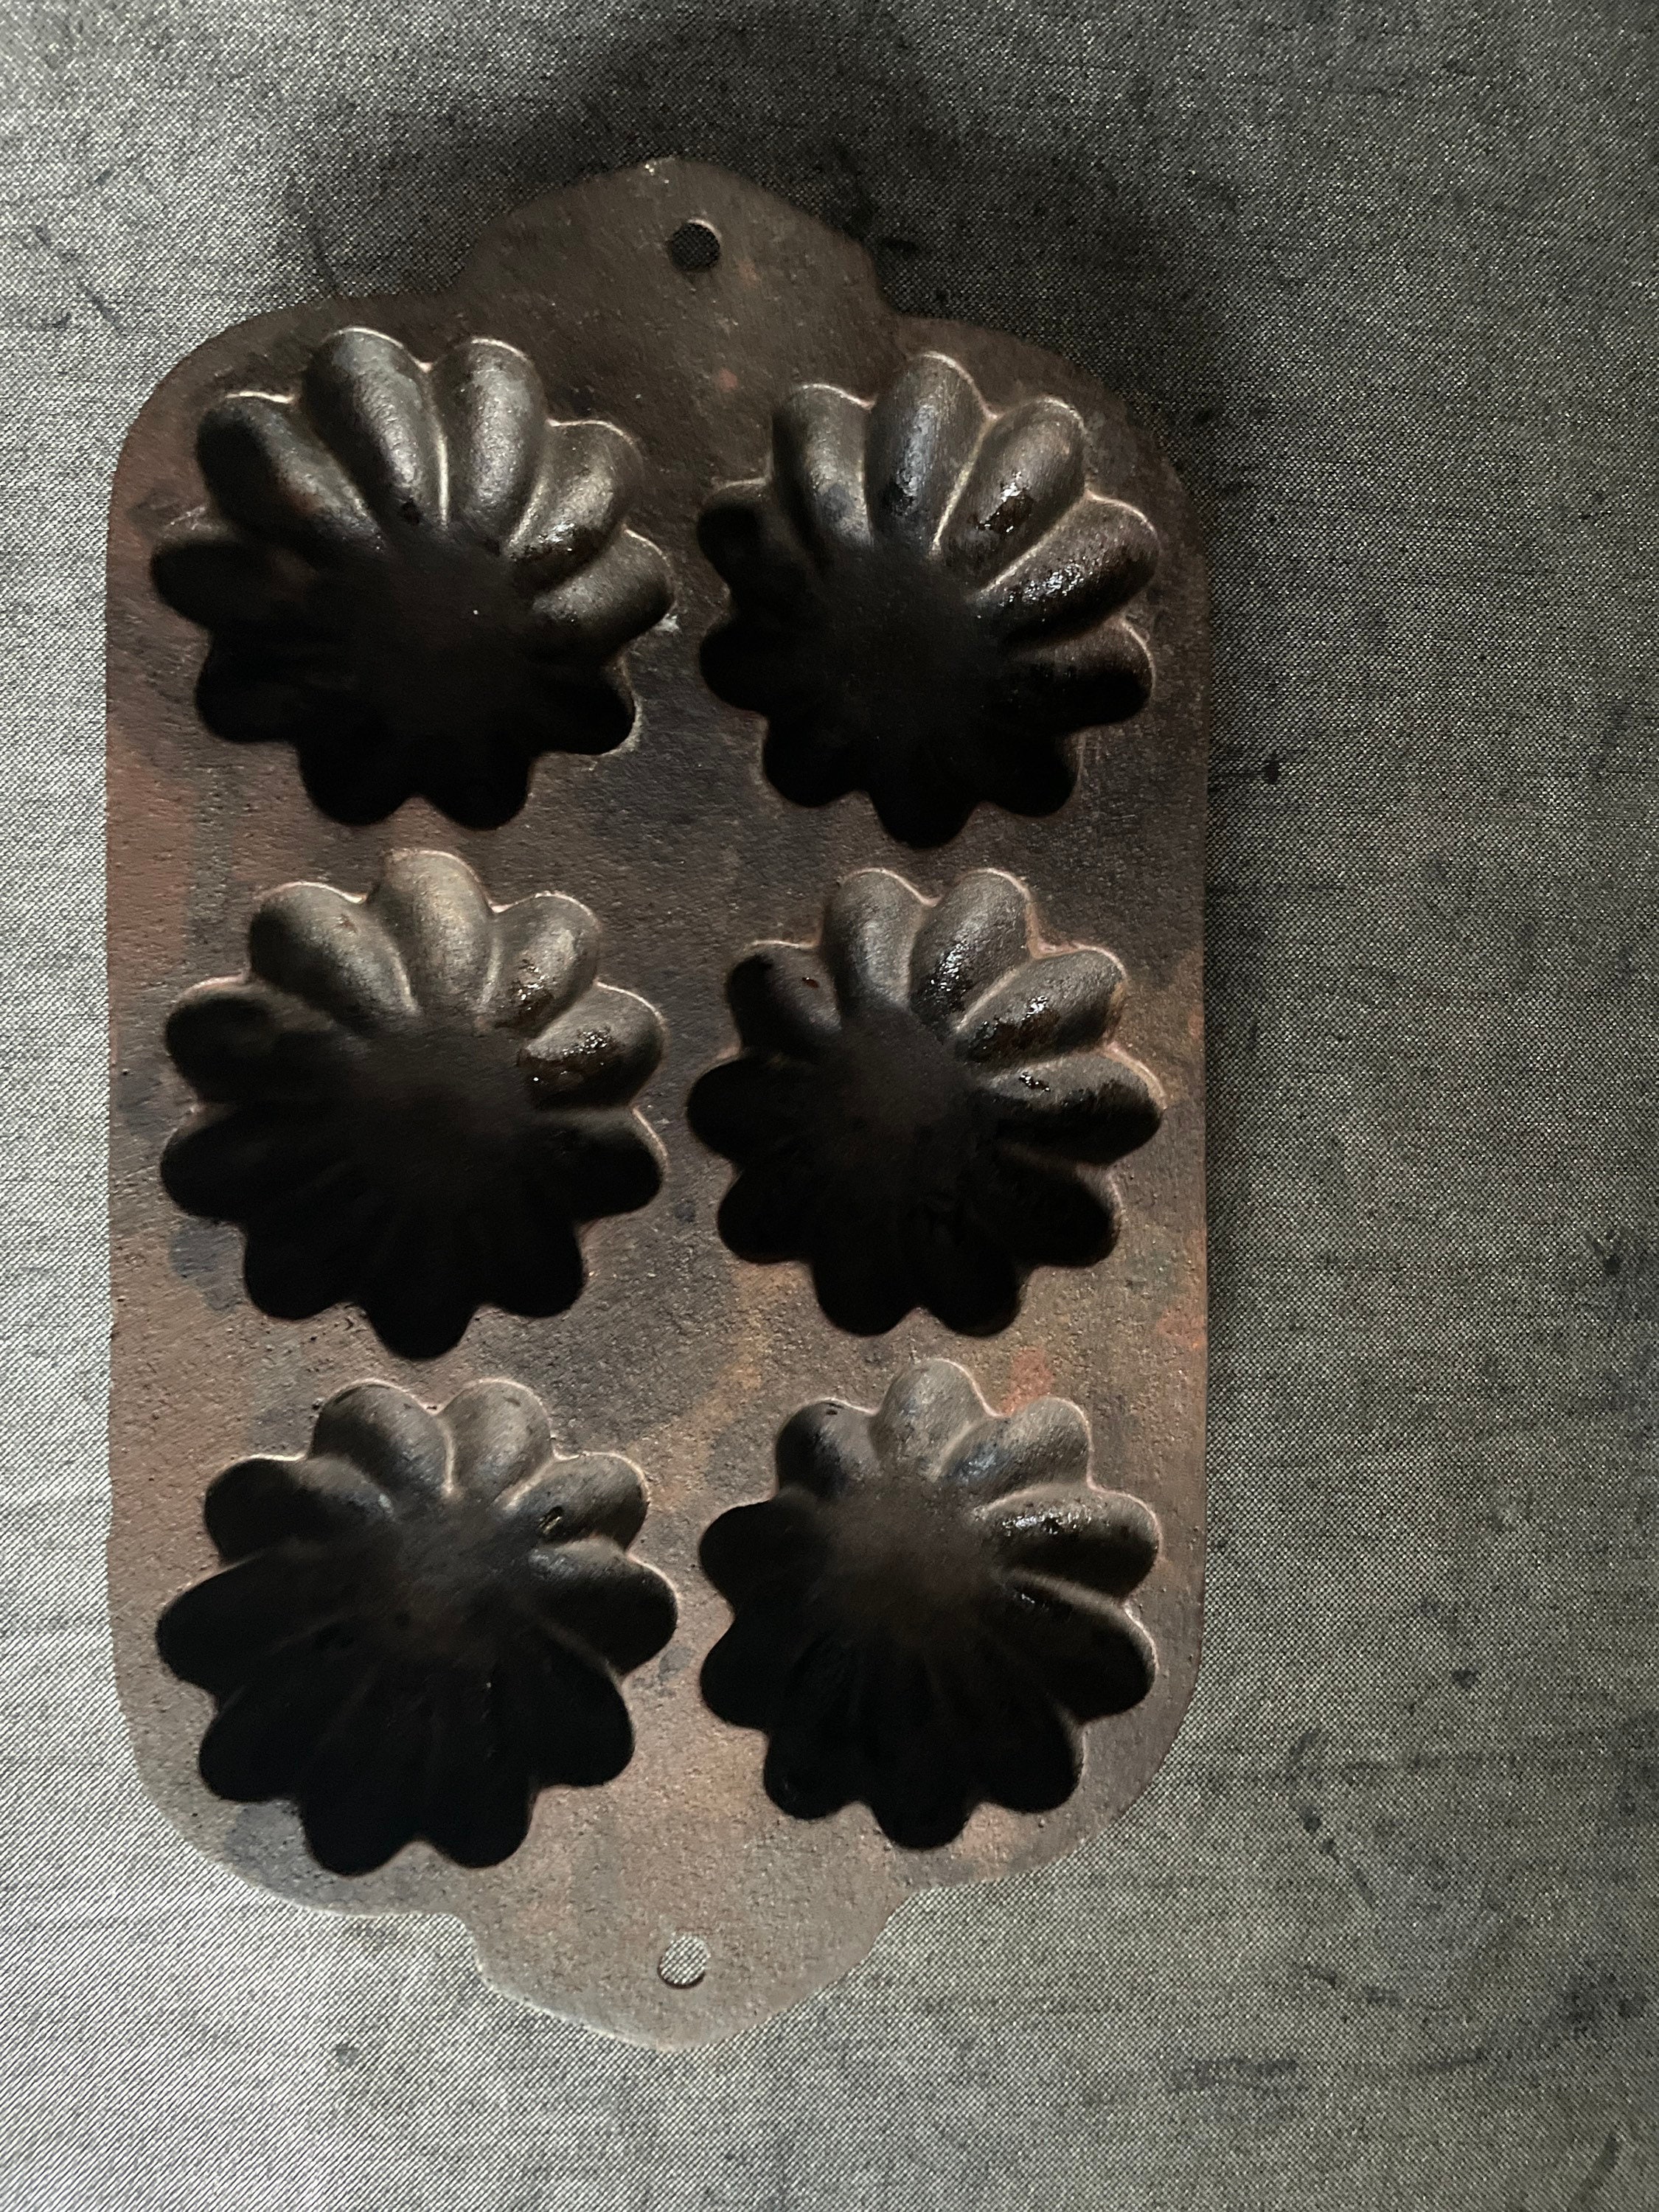 Vintage Cast Iron Mini Bundt Cake Muffin Pan with Handles UNMARKED